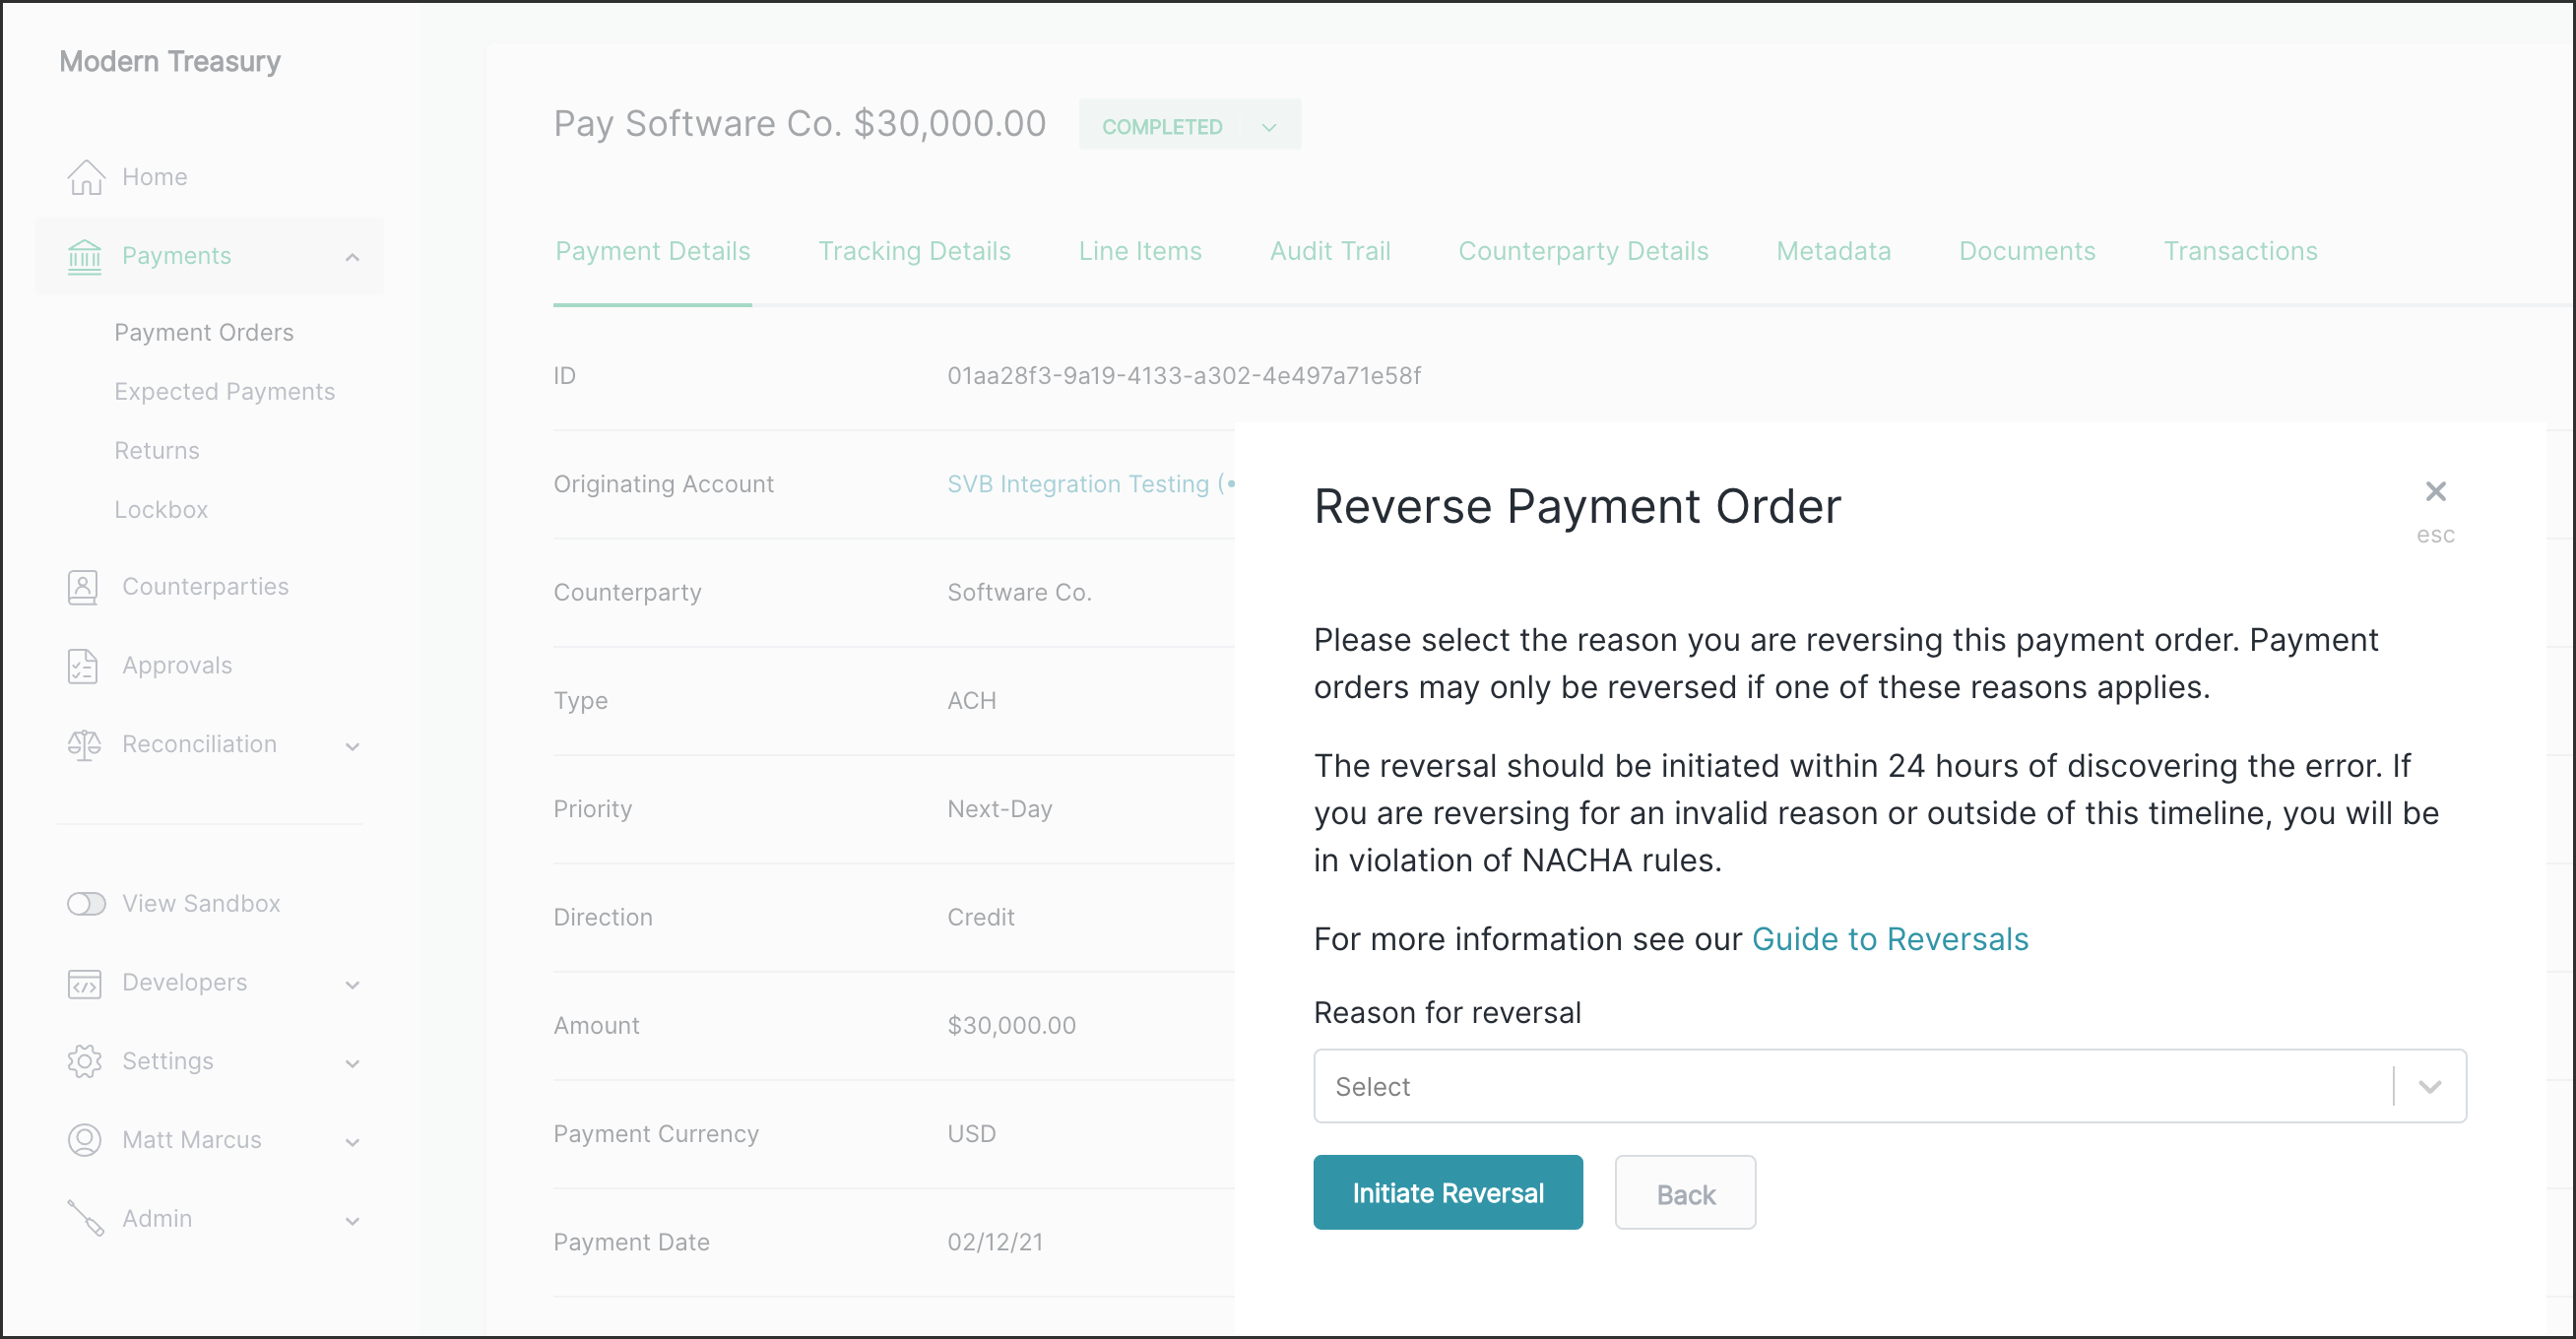 Modern Treasury UI where the user is asked for payment reversal reason.